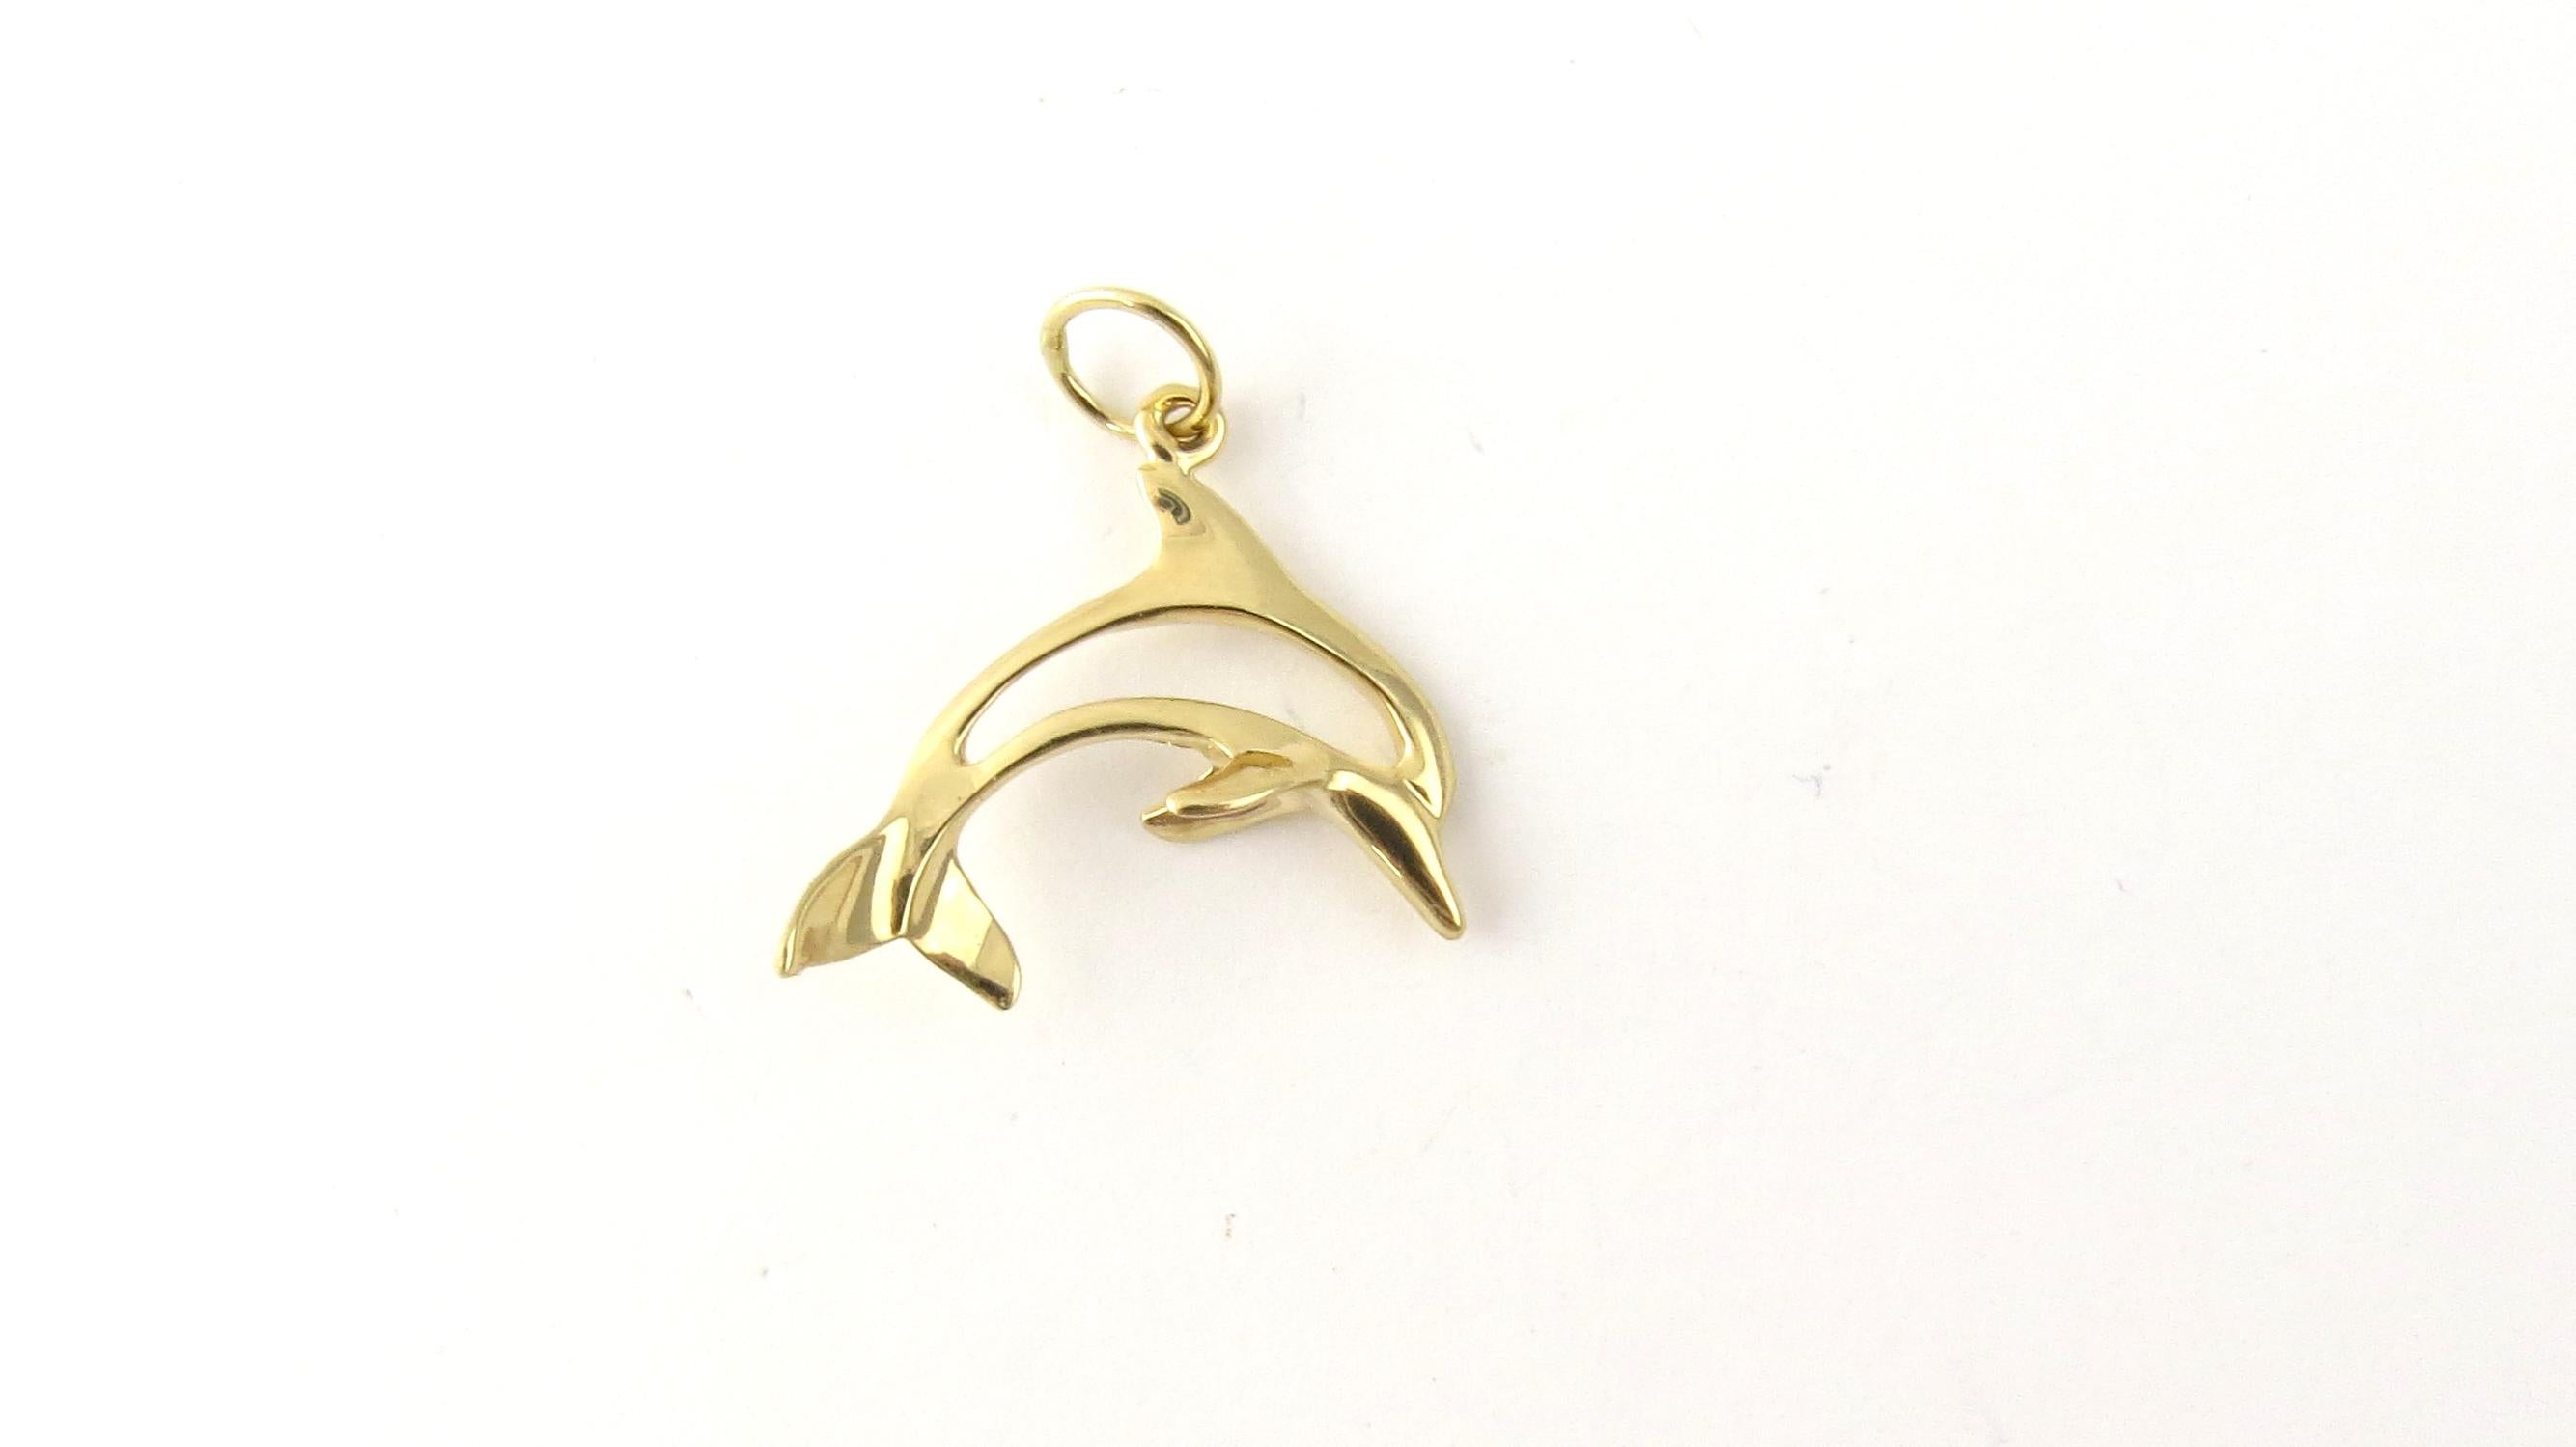 Vintage 14 Karat Yellow Gold Dolphin Charm

Dolphins have been a symbol of good luck and protection since ancient times.

This lovely charm features a beautifully dolphin meticulously detailed in an elegant open design.

Size: 22 mm x 22 mm

Weight: